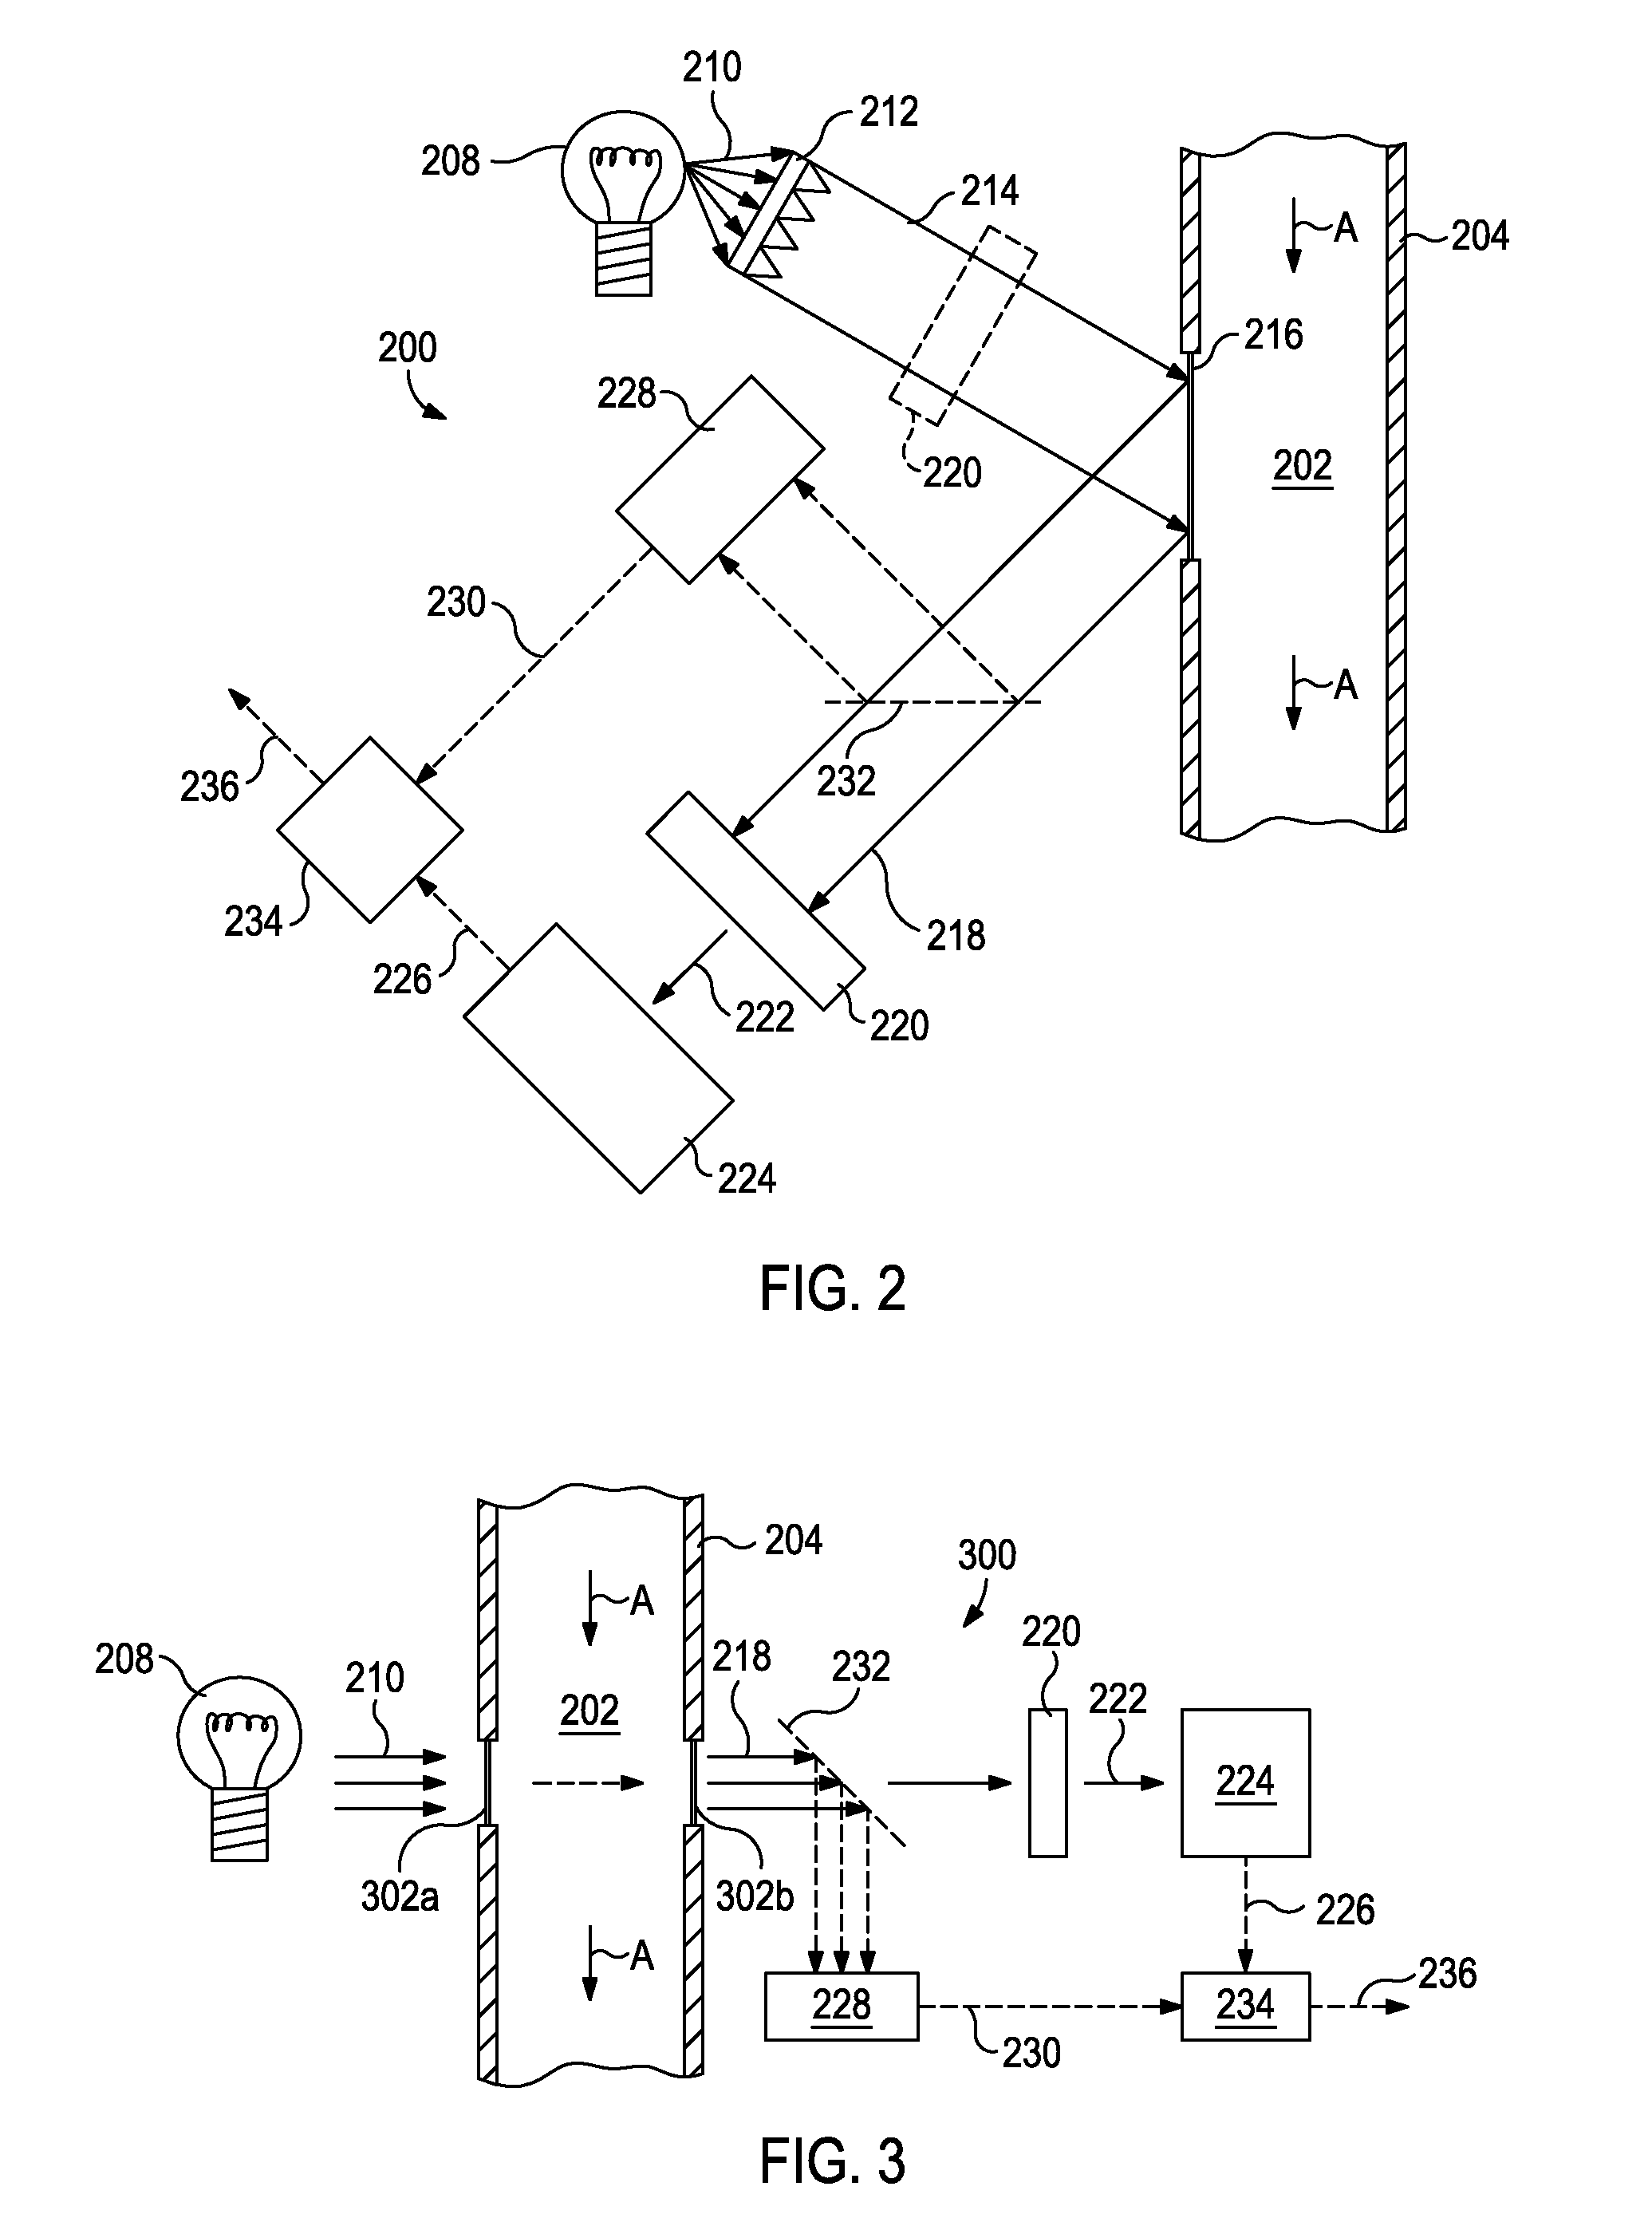 Systems and Methods for Real Time Monitoring of Gas Hydrate Formation